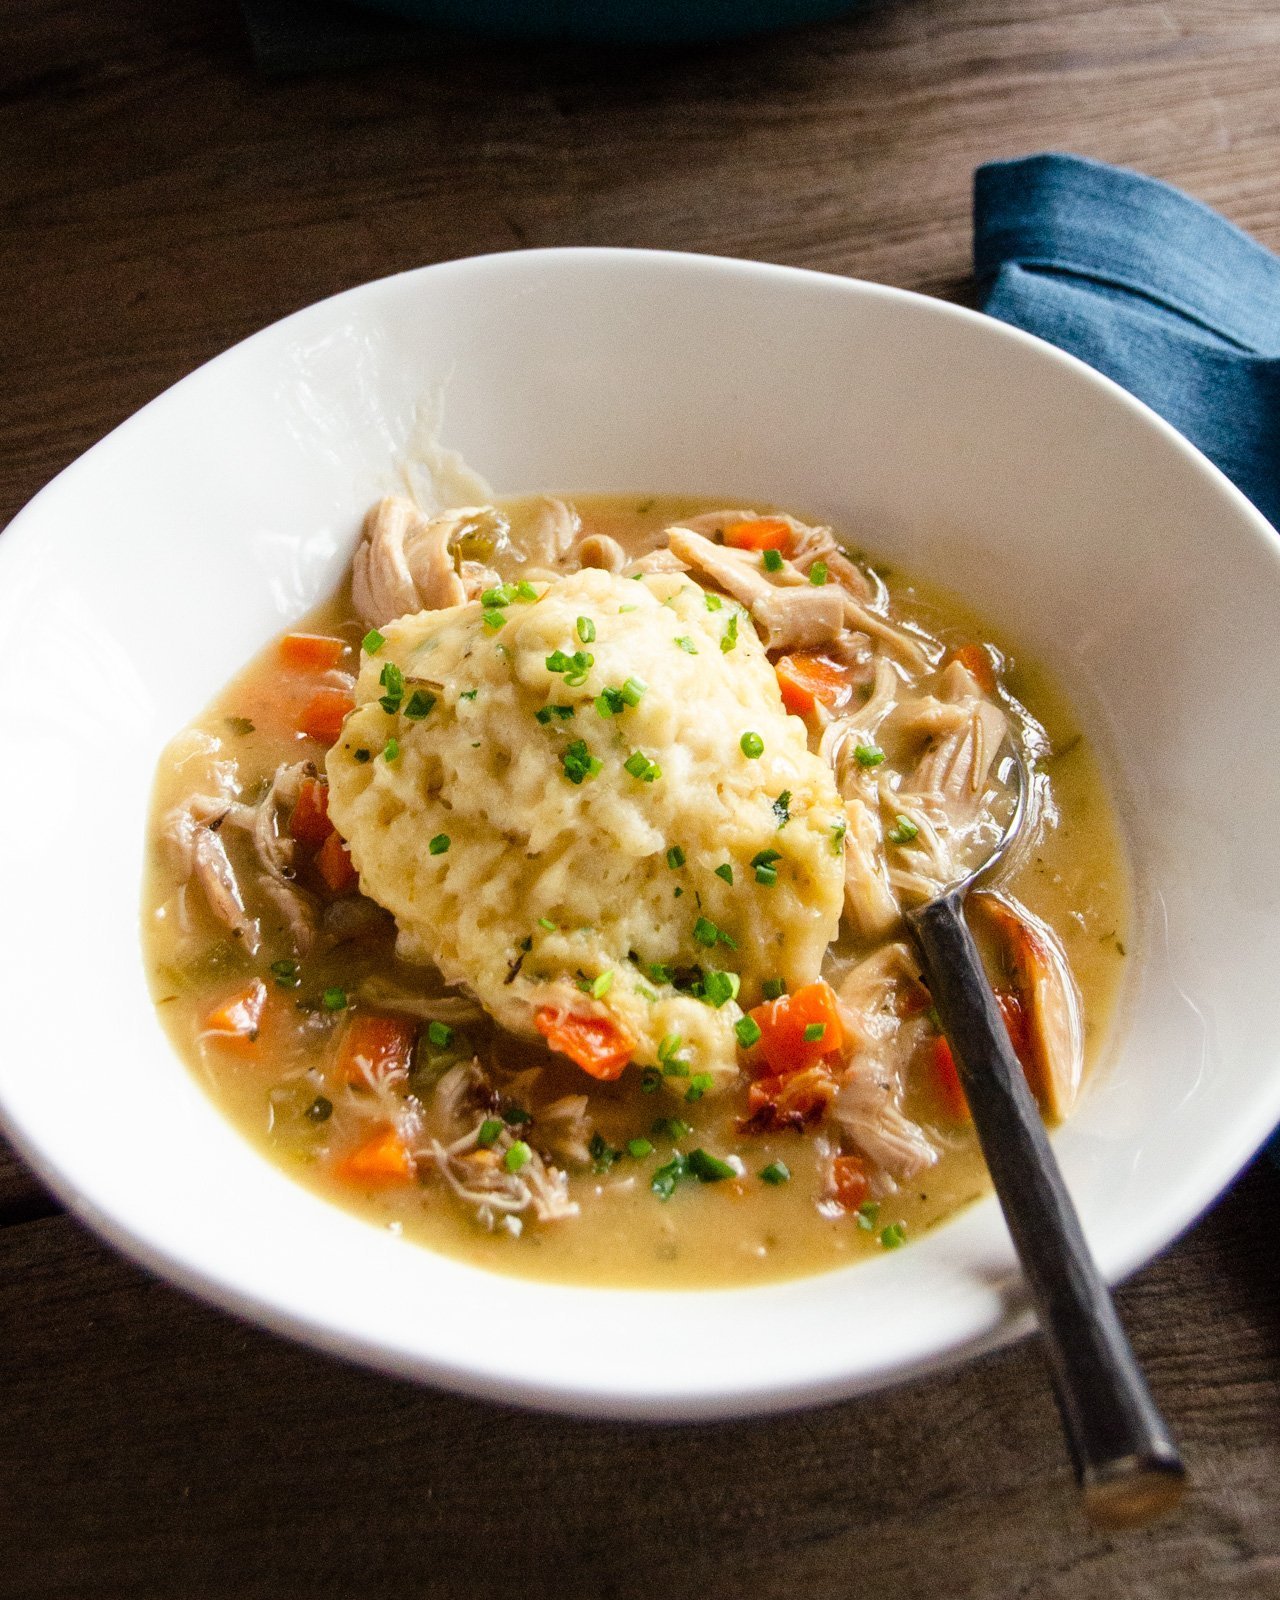 Old-Fashioned Chicken and Dumplings - My Homemade Roots